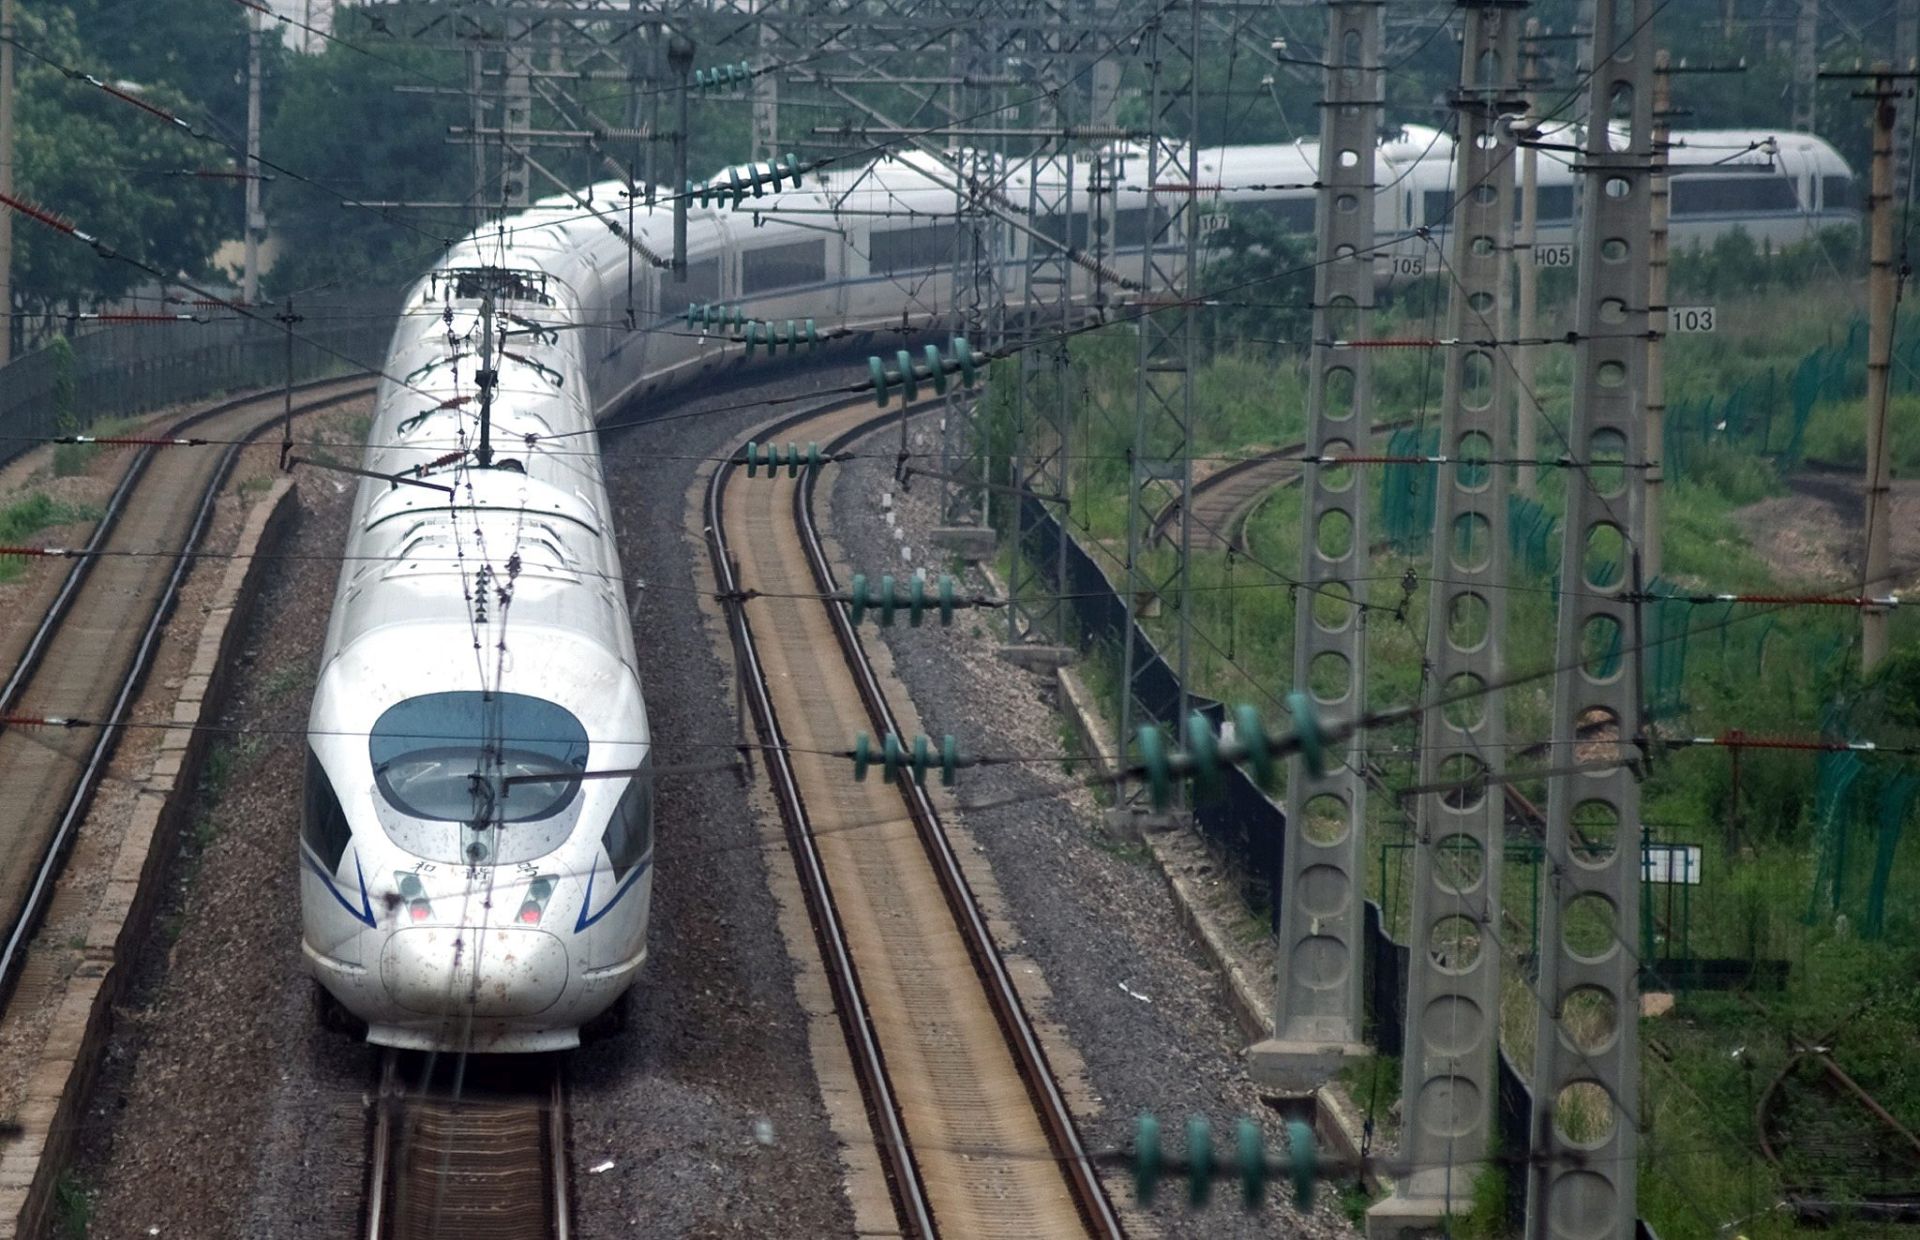 epa04392357 (FILE) A file photo dated 04 August 2011 showing a China Railway High-speed (CRH) train travelling through Qingdao city, eastern China's Shandong province. China's railway authority said that it will ensure 'absolute safety' in the operation of high-speed railways after a deadly train crash on July 23 that claimed 40 dead and injured 191 others. By the end of 2010, 8,358 km of high-speed railways had been put into operation in China, ranking first in the world in terms of length.  EPA/WU HONG. China will speed up the construction of its high-speed railway network, already the world's largest, official media reported 09 September 2014. The state railway company said it had increased investment in the first eight months of the year by 20 per cent, the Xinhua news agency reported. China will spend 800 billion yuan (130 billion dollars) on expanding its rail network this year. There are currently more than 10,000 kilometres of high-speed rail lines in China.  EPA/WU HONG